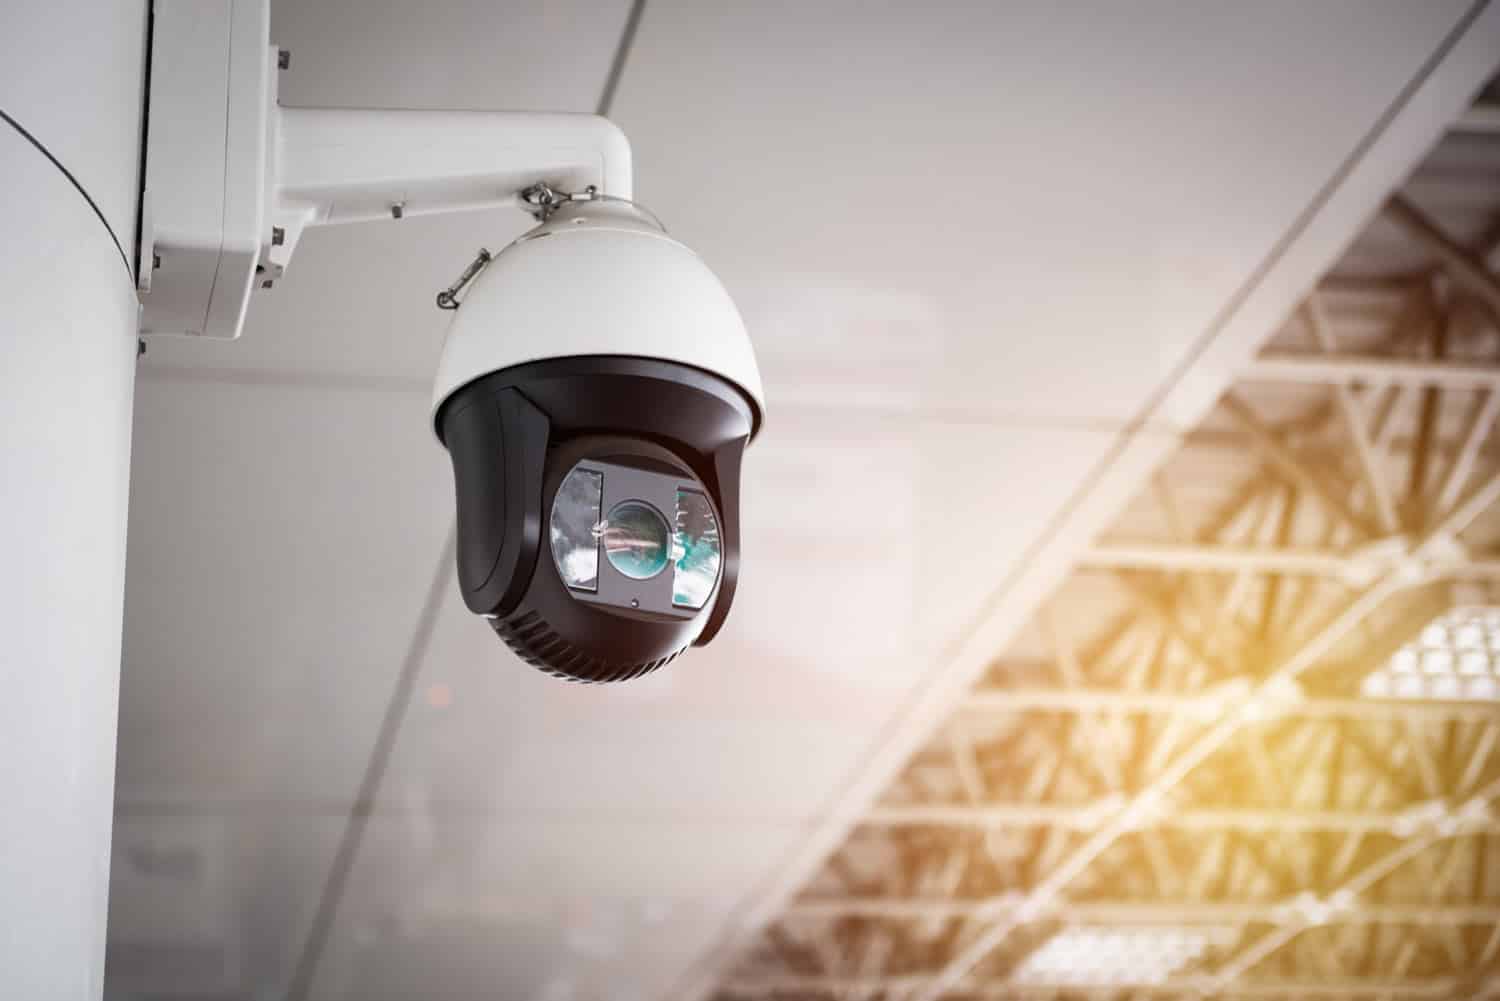 What Are the Benefits of a Security Camera with Audio Recording